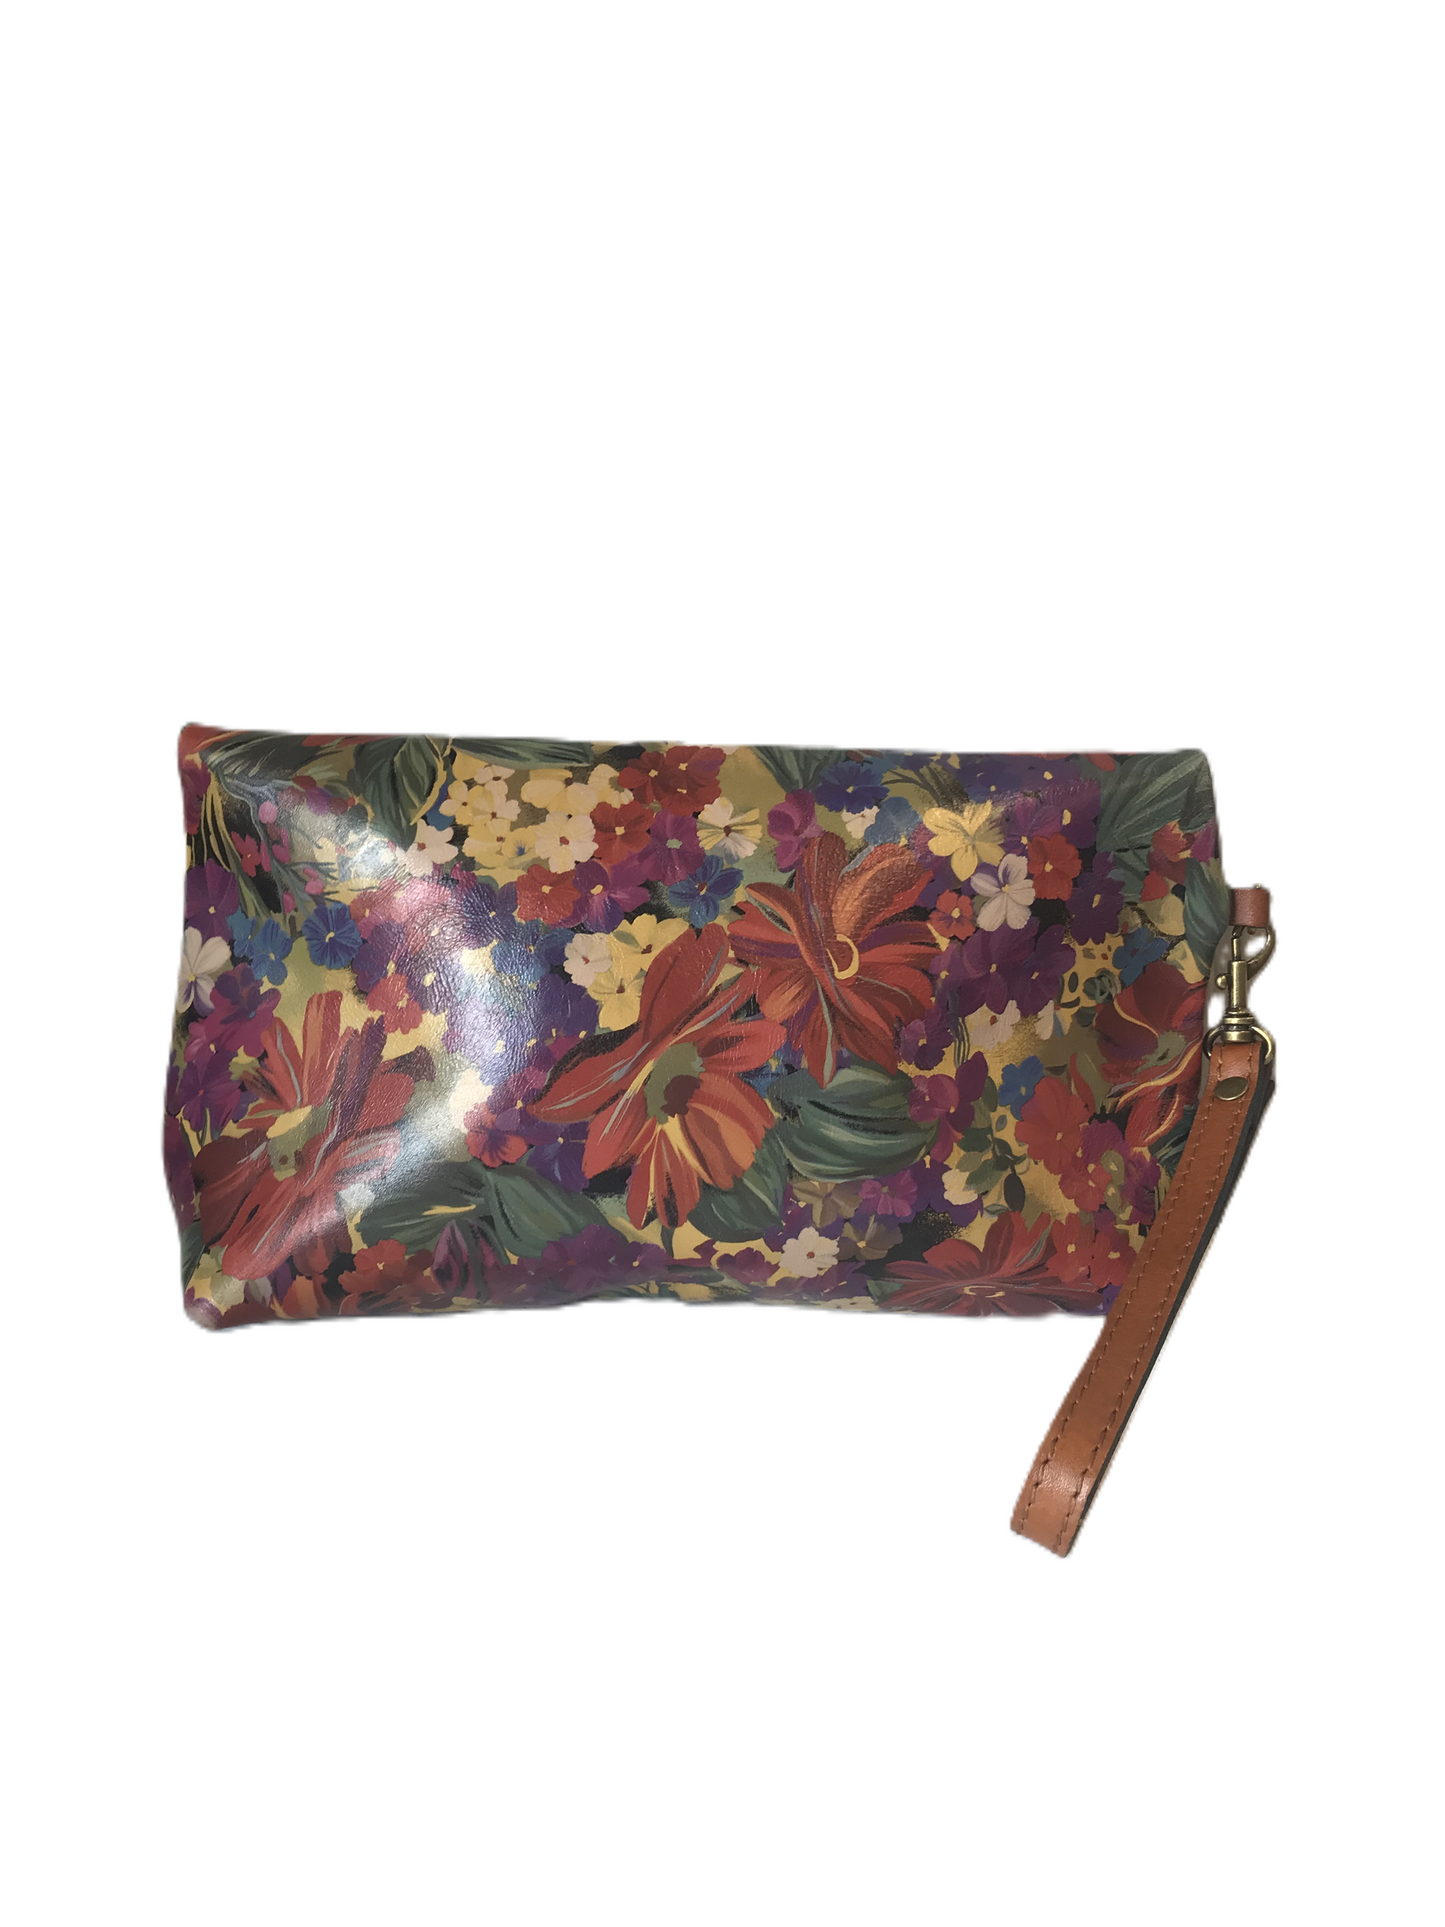 Wristlet By Patricia Nash, Size: Small